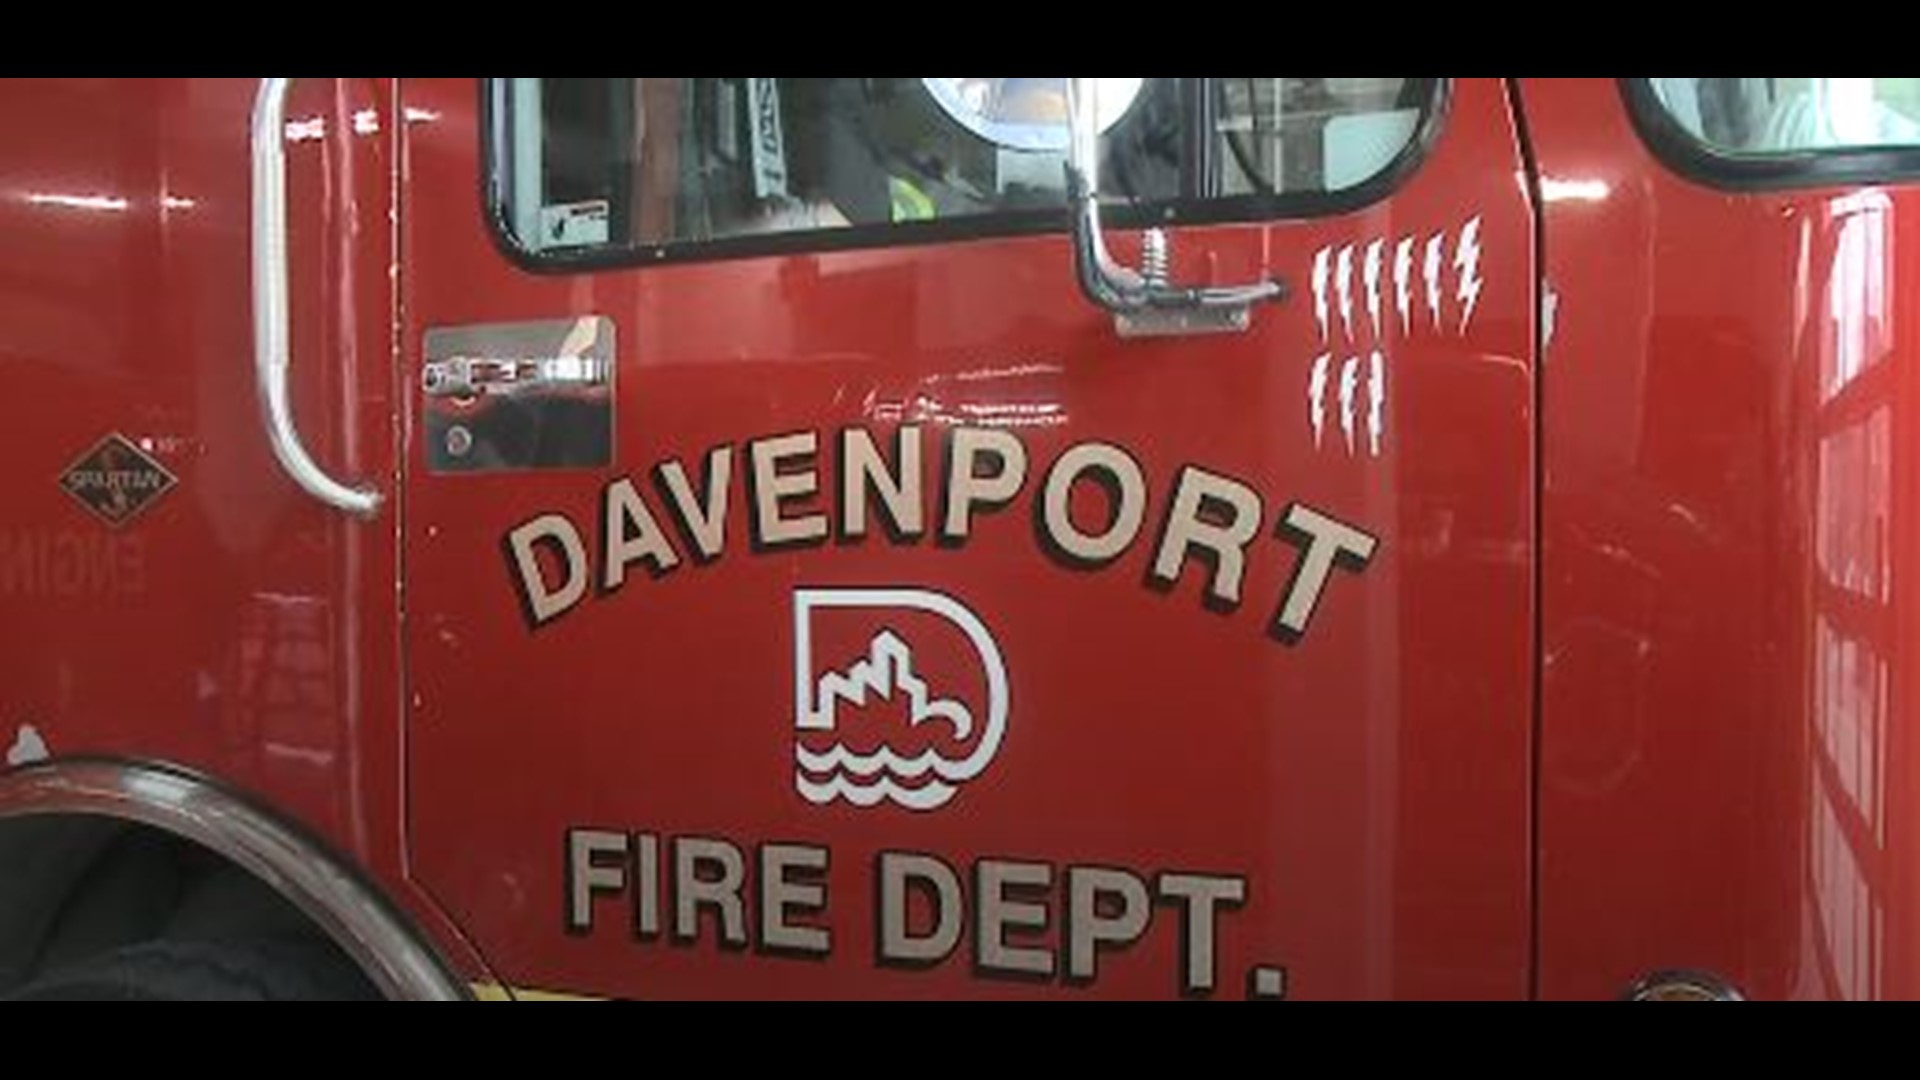 DFD recognizes saves in the community beyond fighting fires